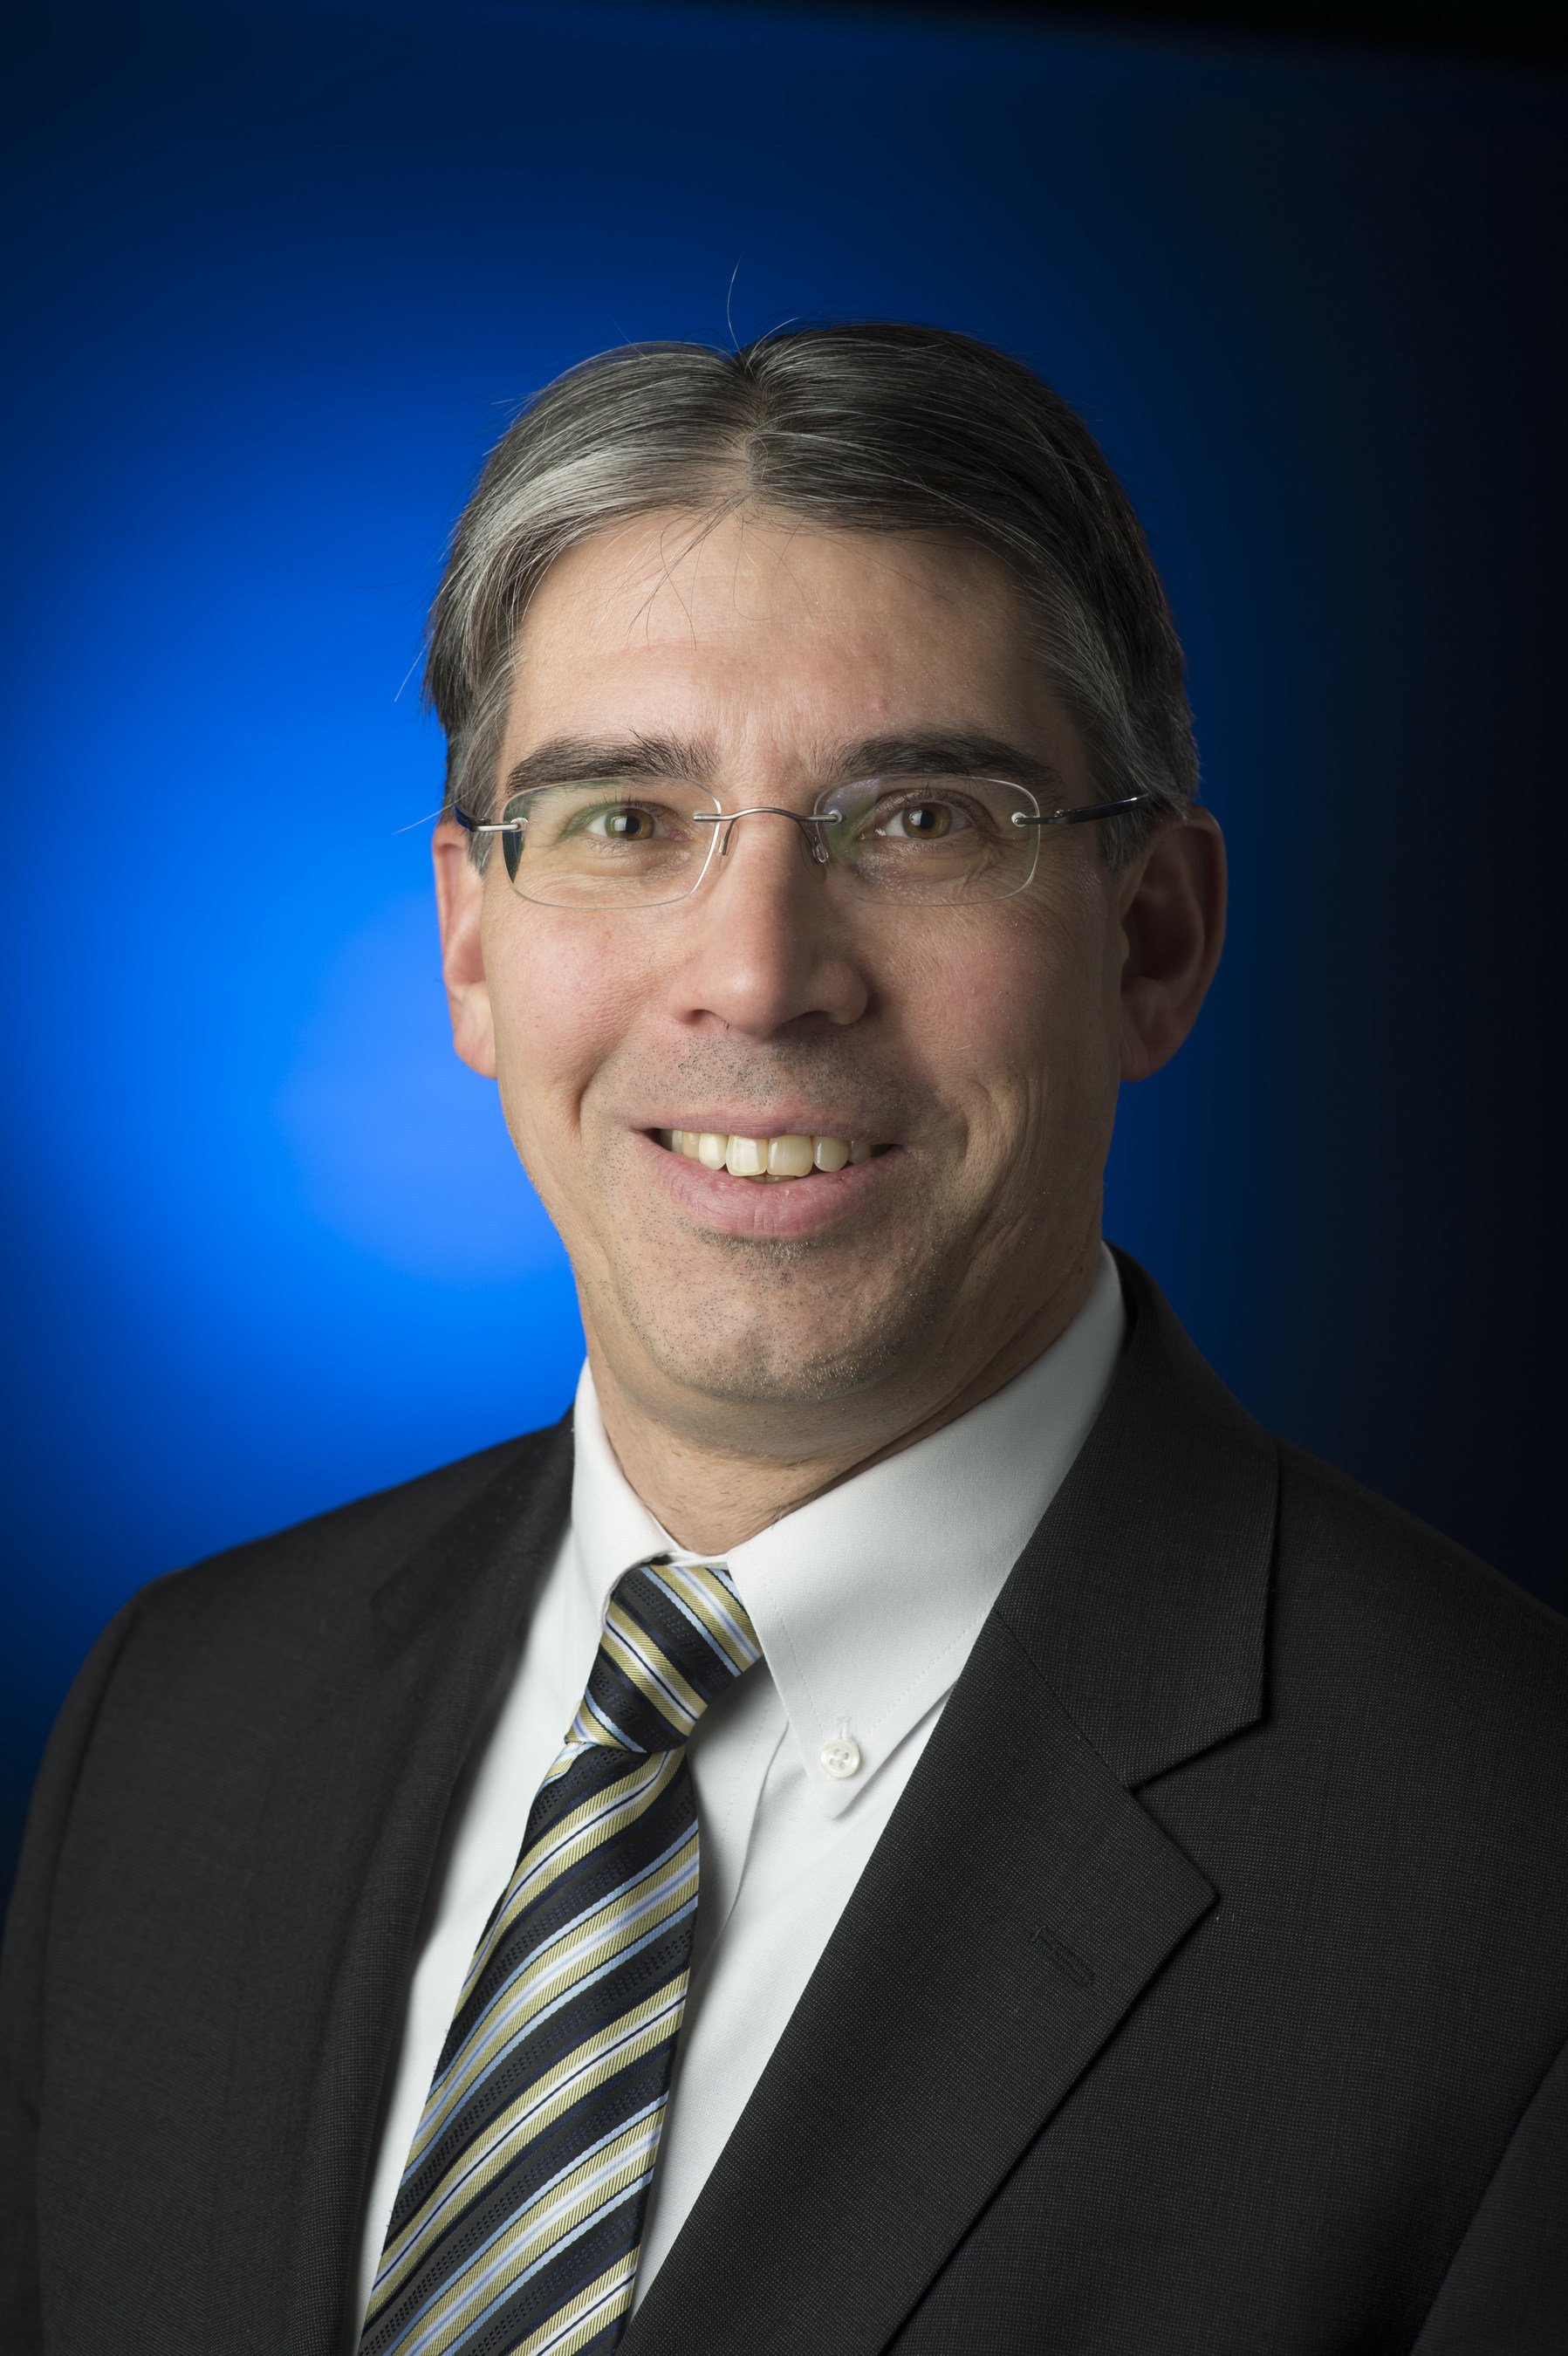 Ball Aerospace & Technologies Corp. has hired Michael Gazarik as Director for its Office of Technology on the Boulder campus effective March 2. Dr. Gazarik will lead the alignment of Ball's technology development resources with business development and growth strategies.